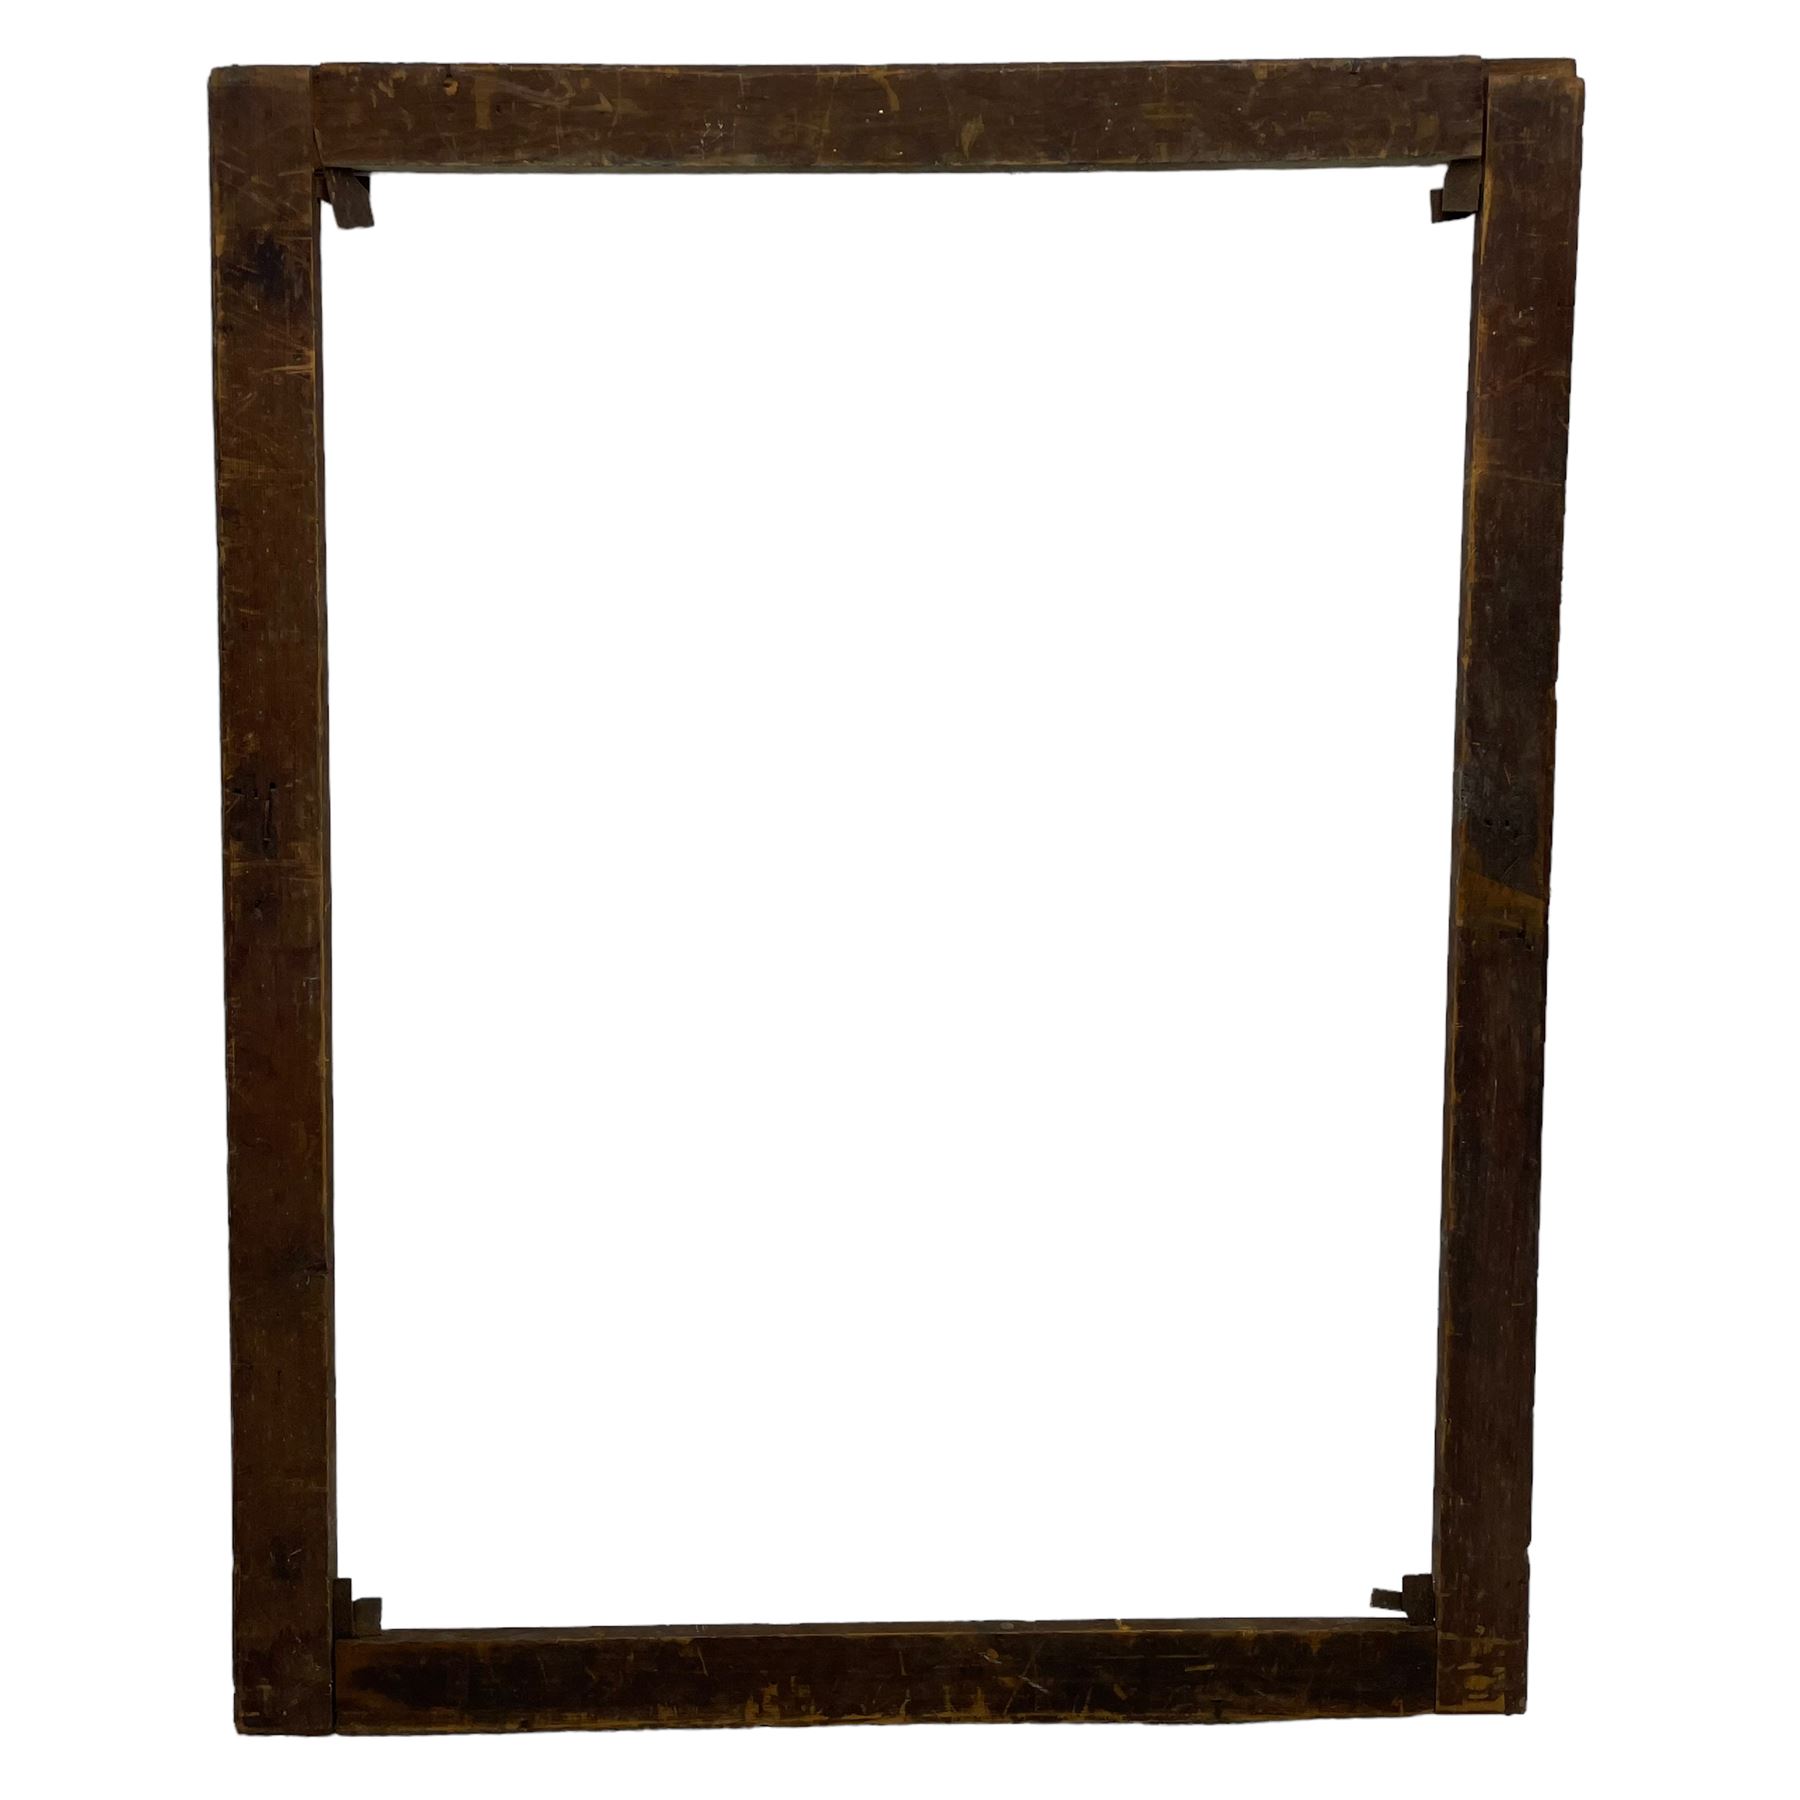 19th century giltwood and gesso moulded picture or mirror frame - Image 8 of 12